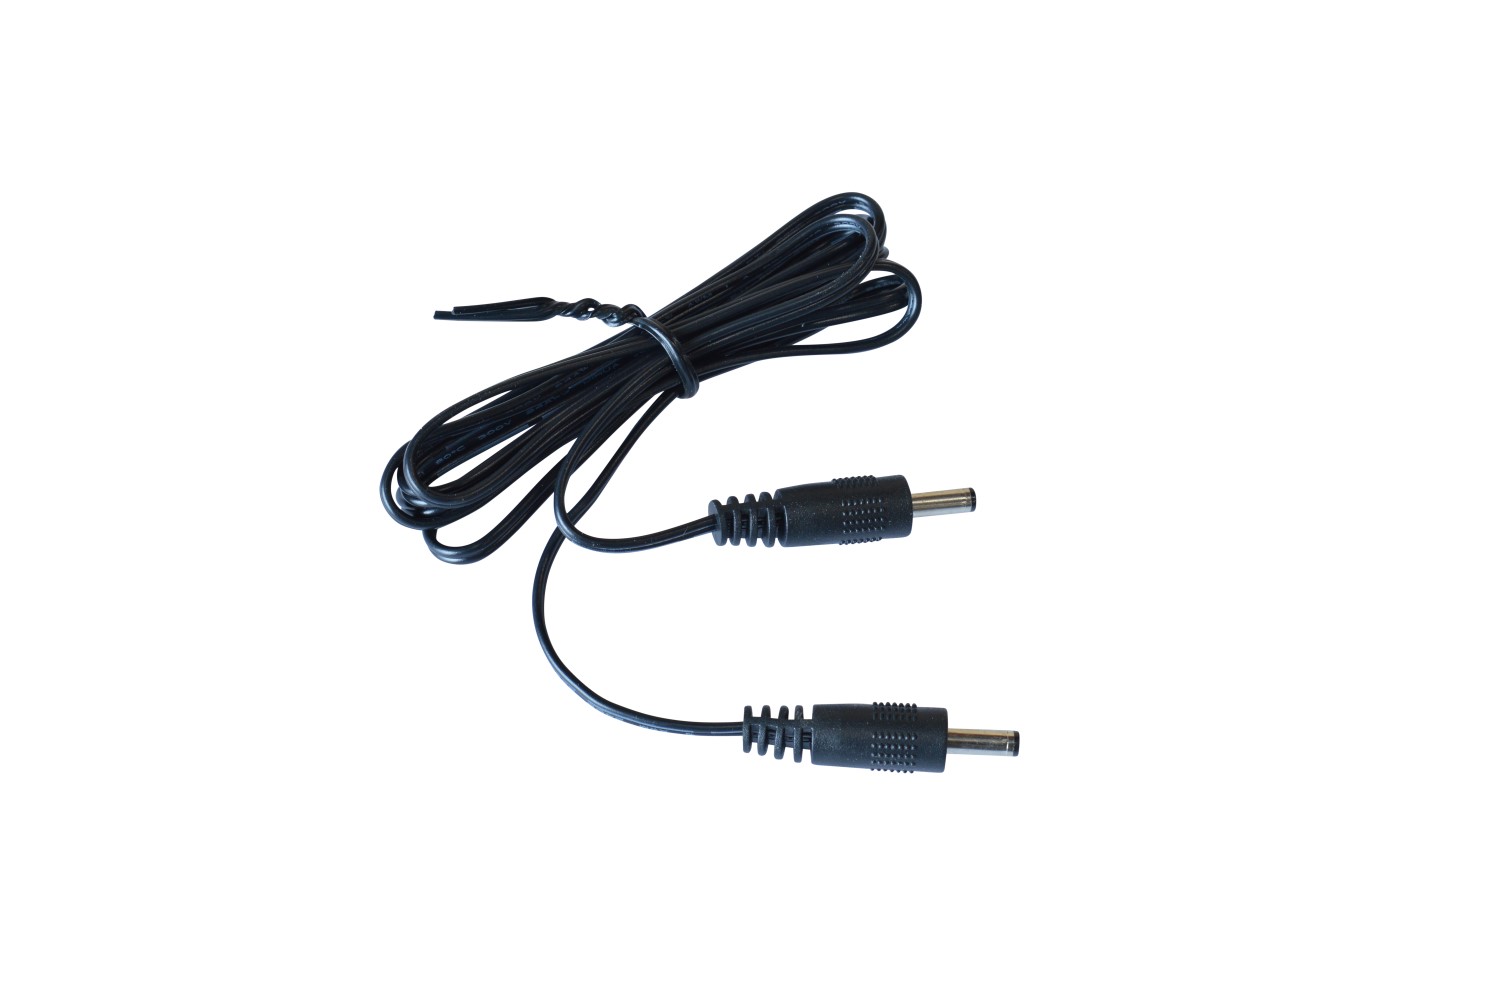 LED connection cable 1 meter